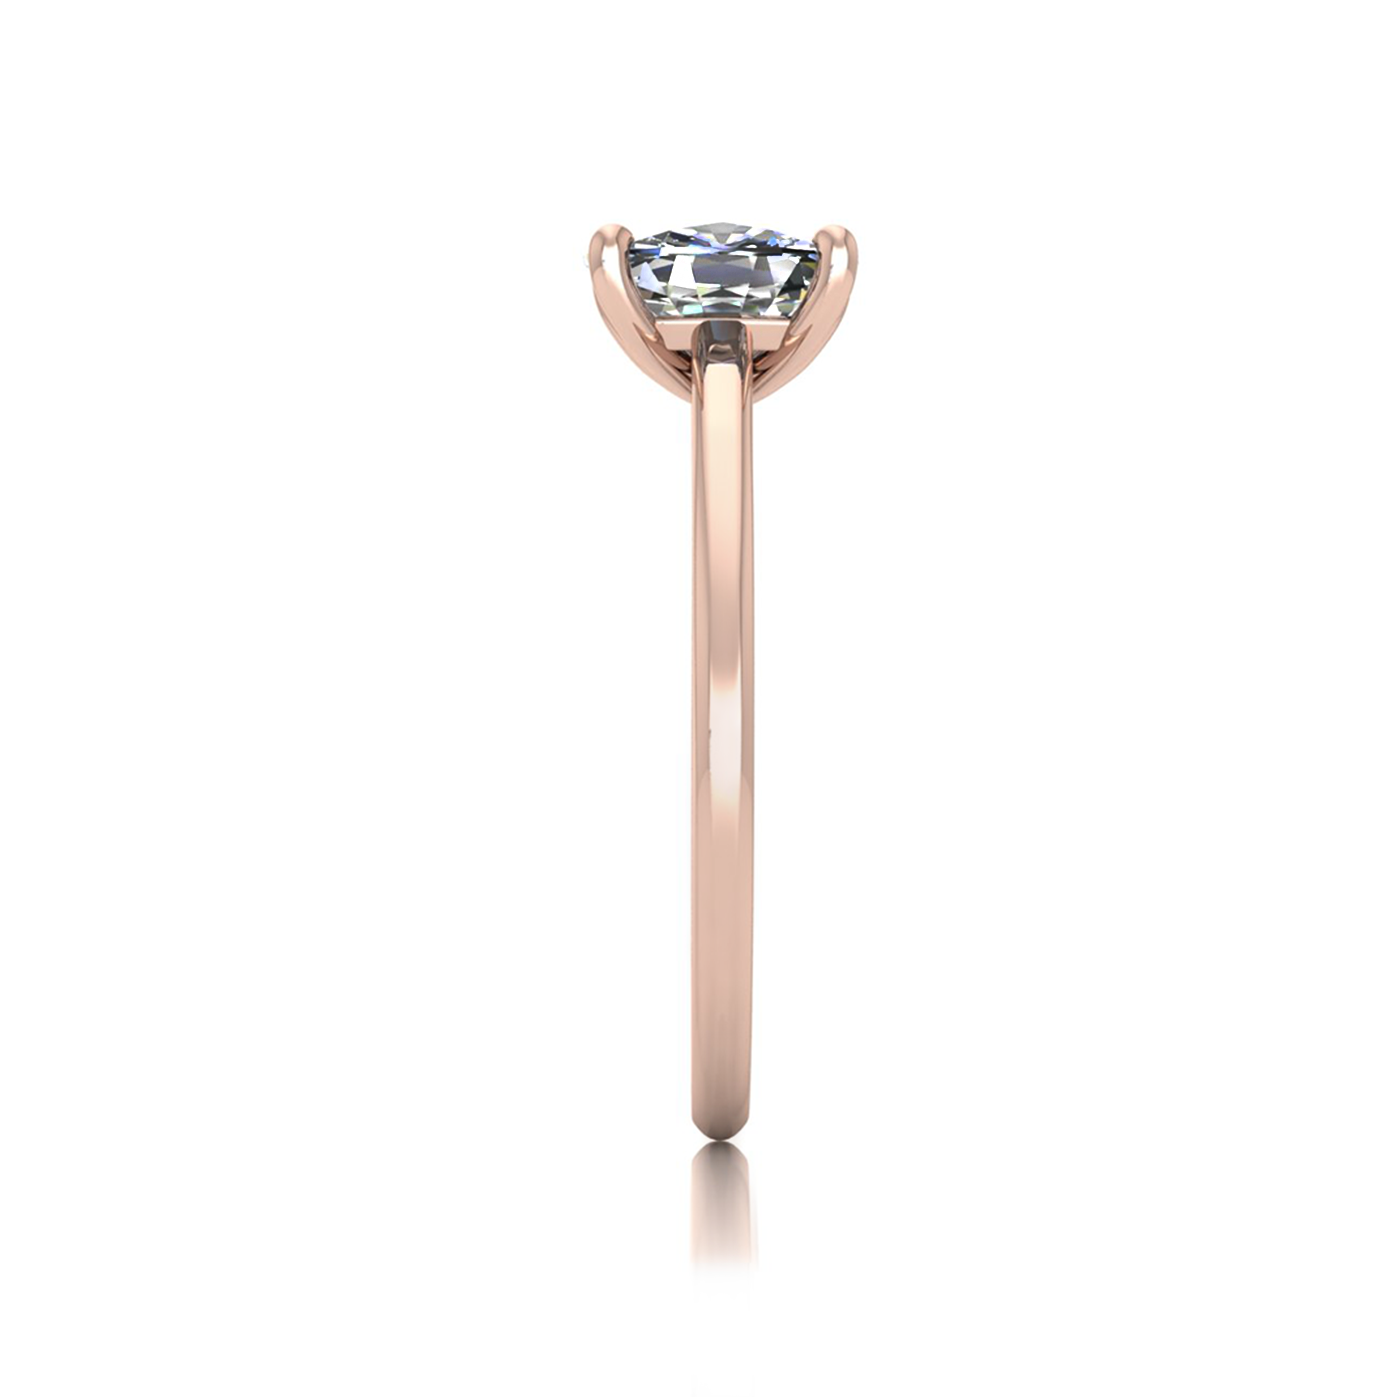 18k rose gold  1.50 ct 4 prongs solitaire elongated cushion cut diamond engagement ring with whisper thin band